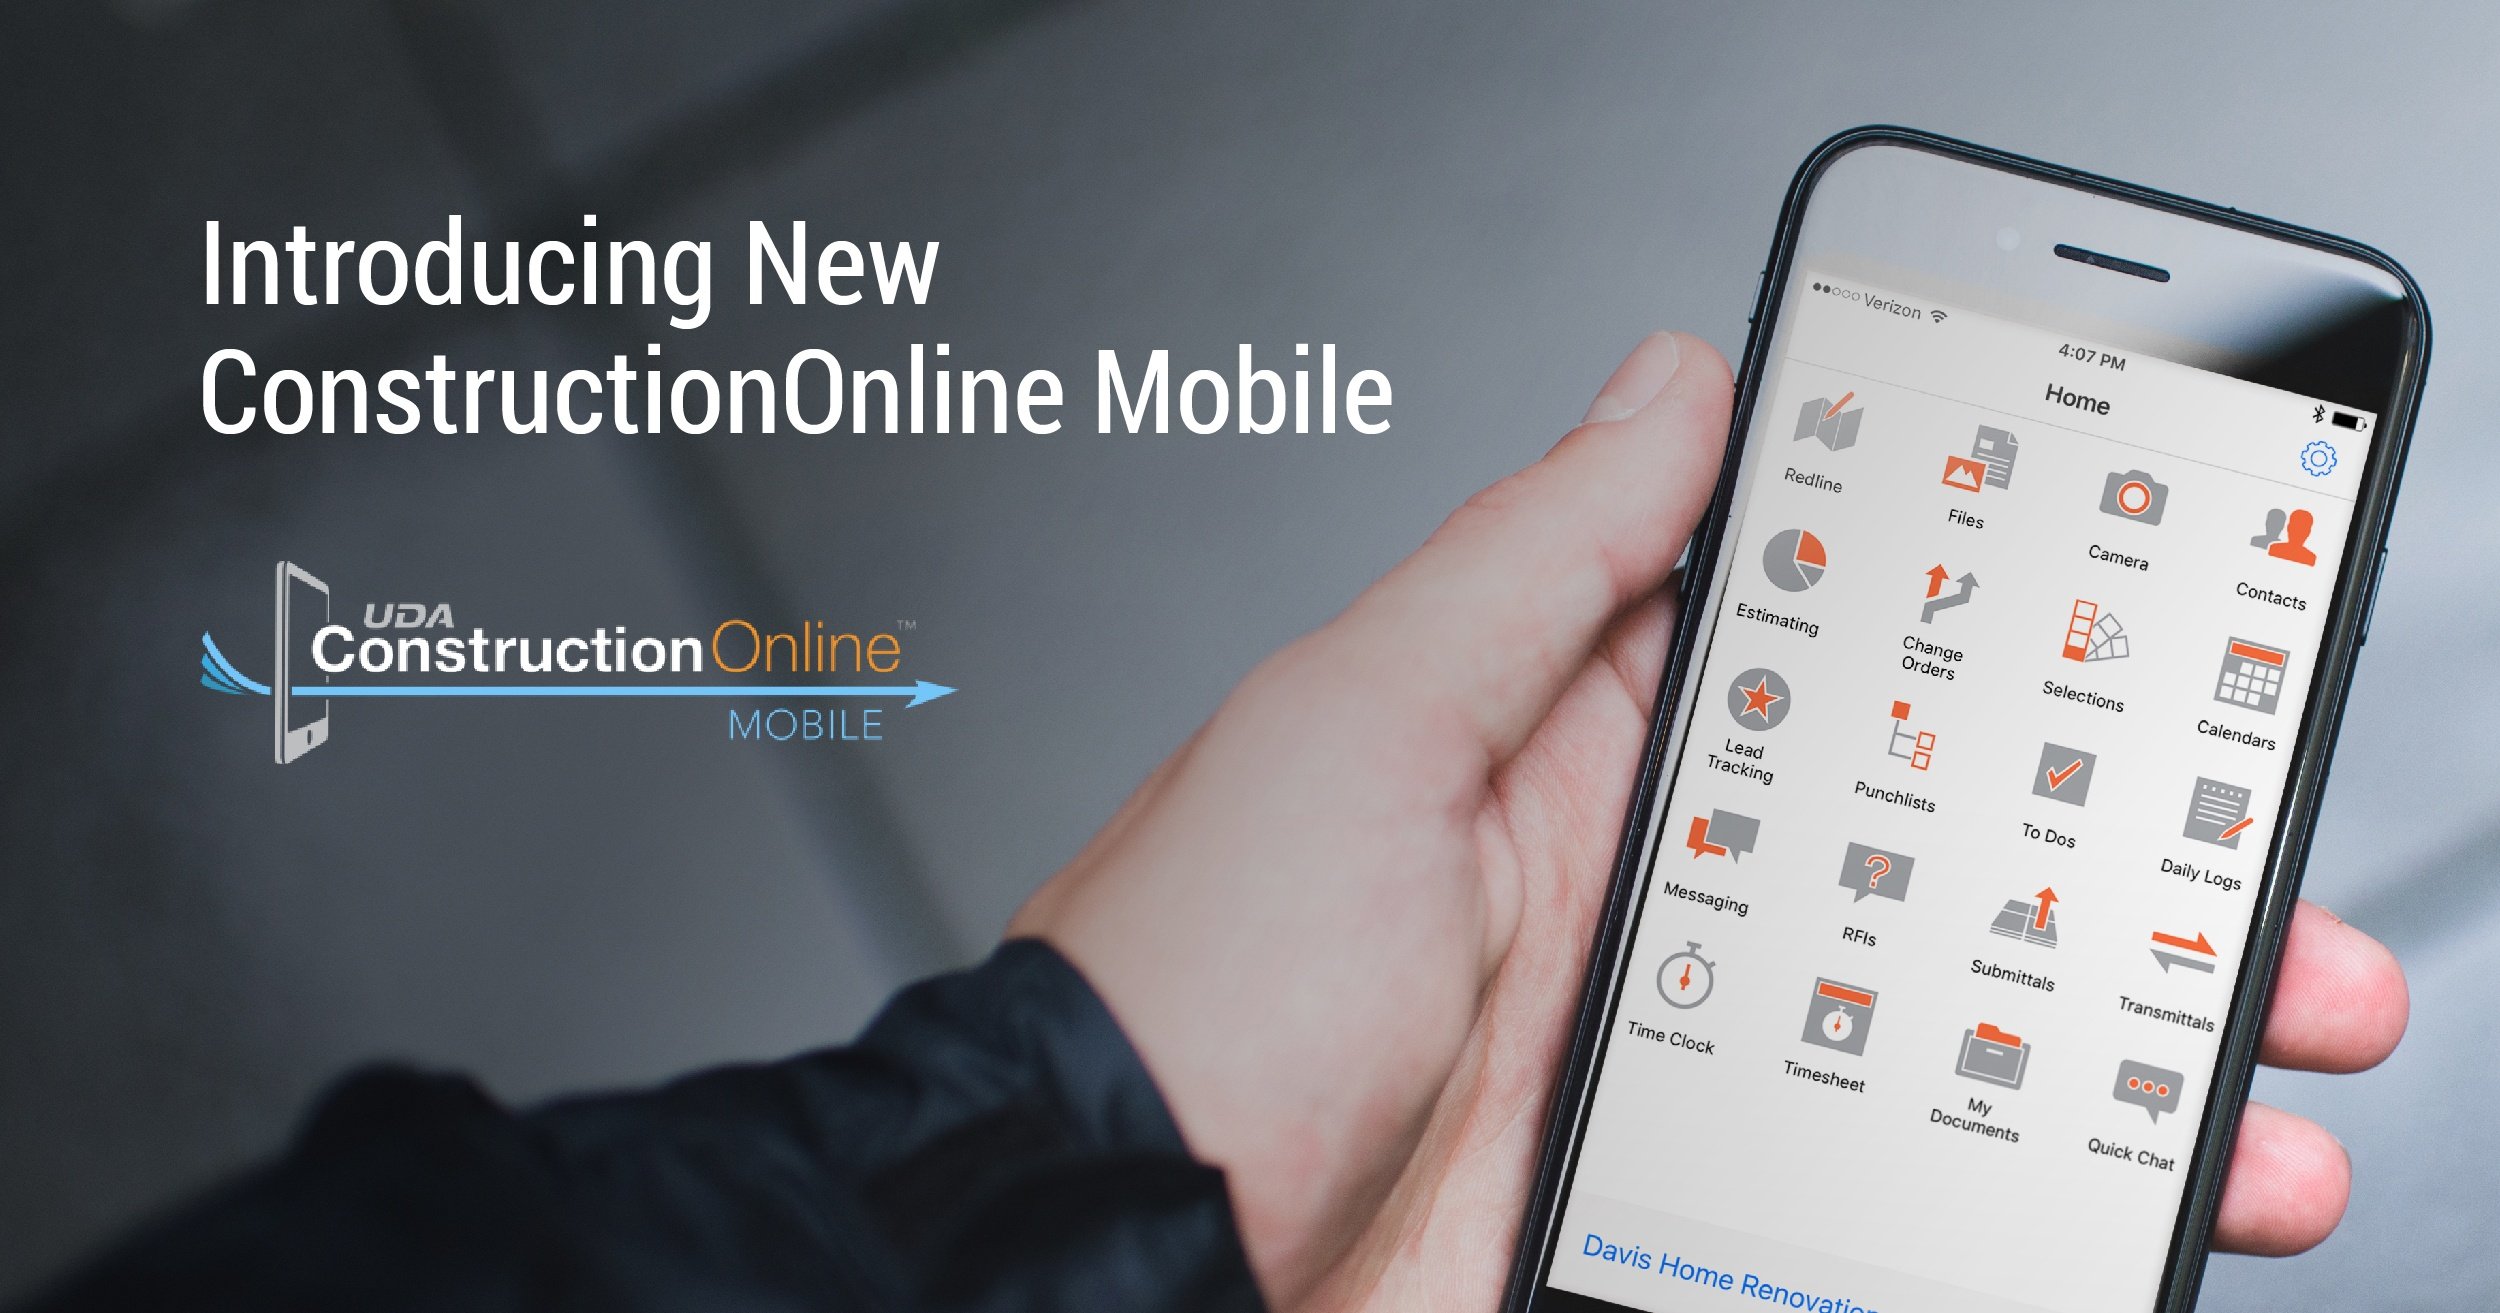 New, Small, and Powerful: Introducing the ConstructionOnline Mobile App